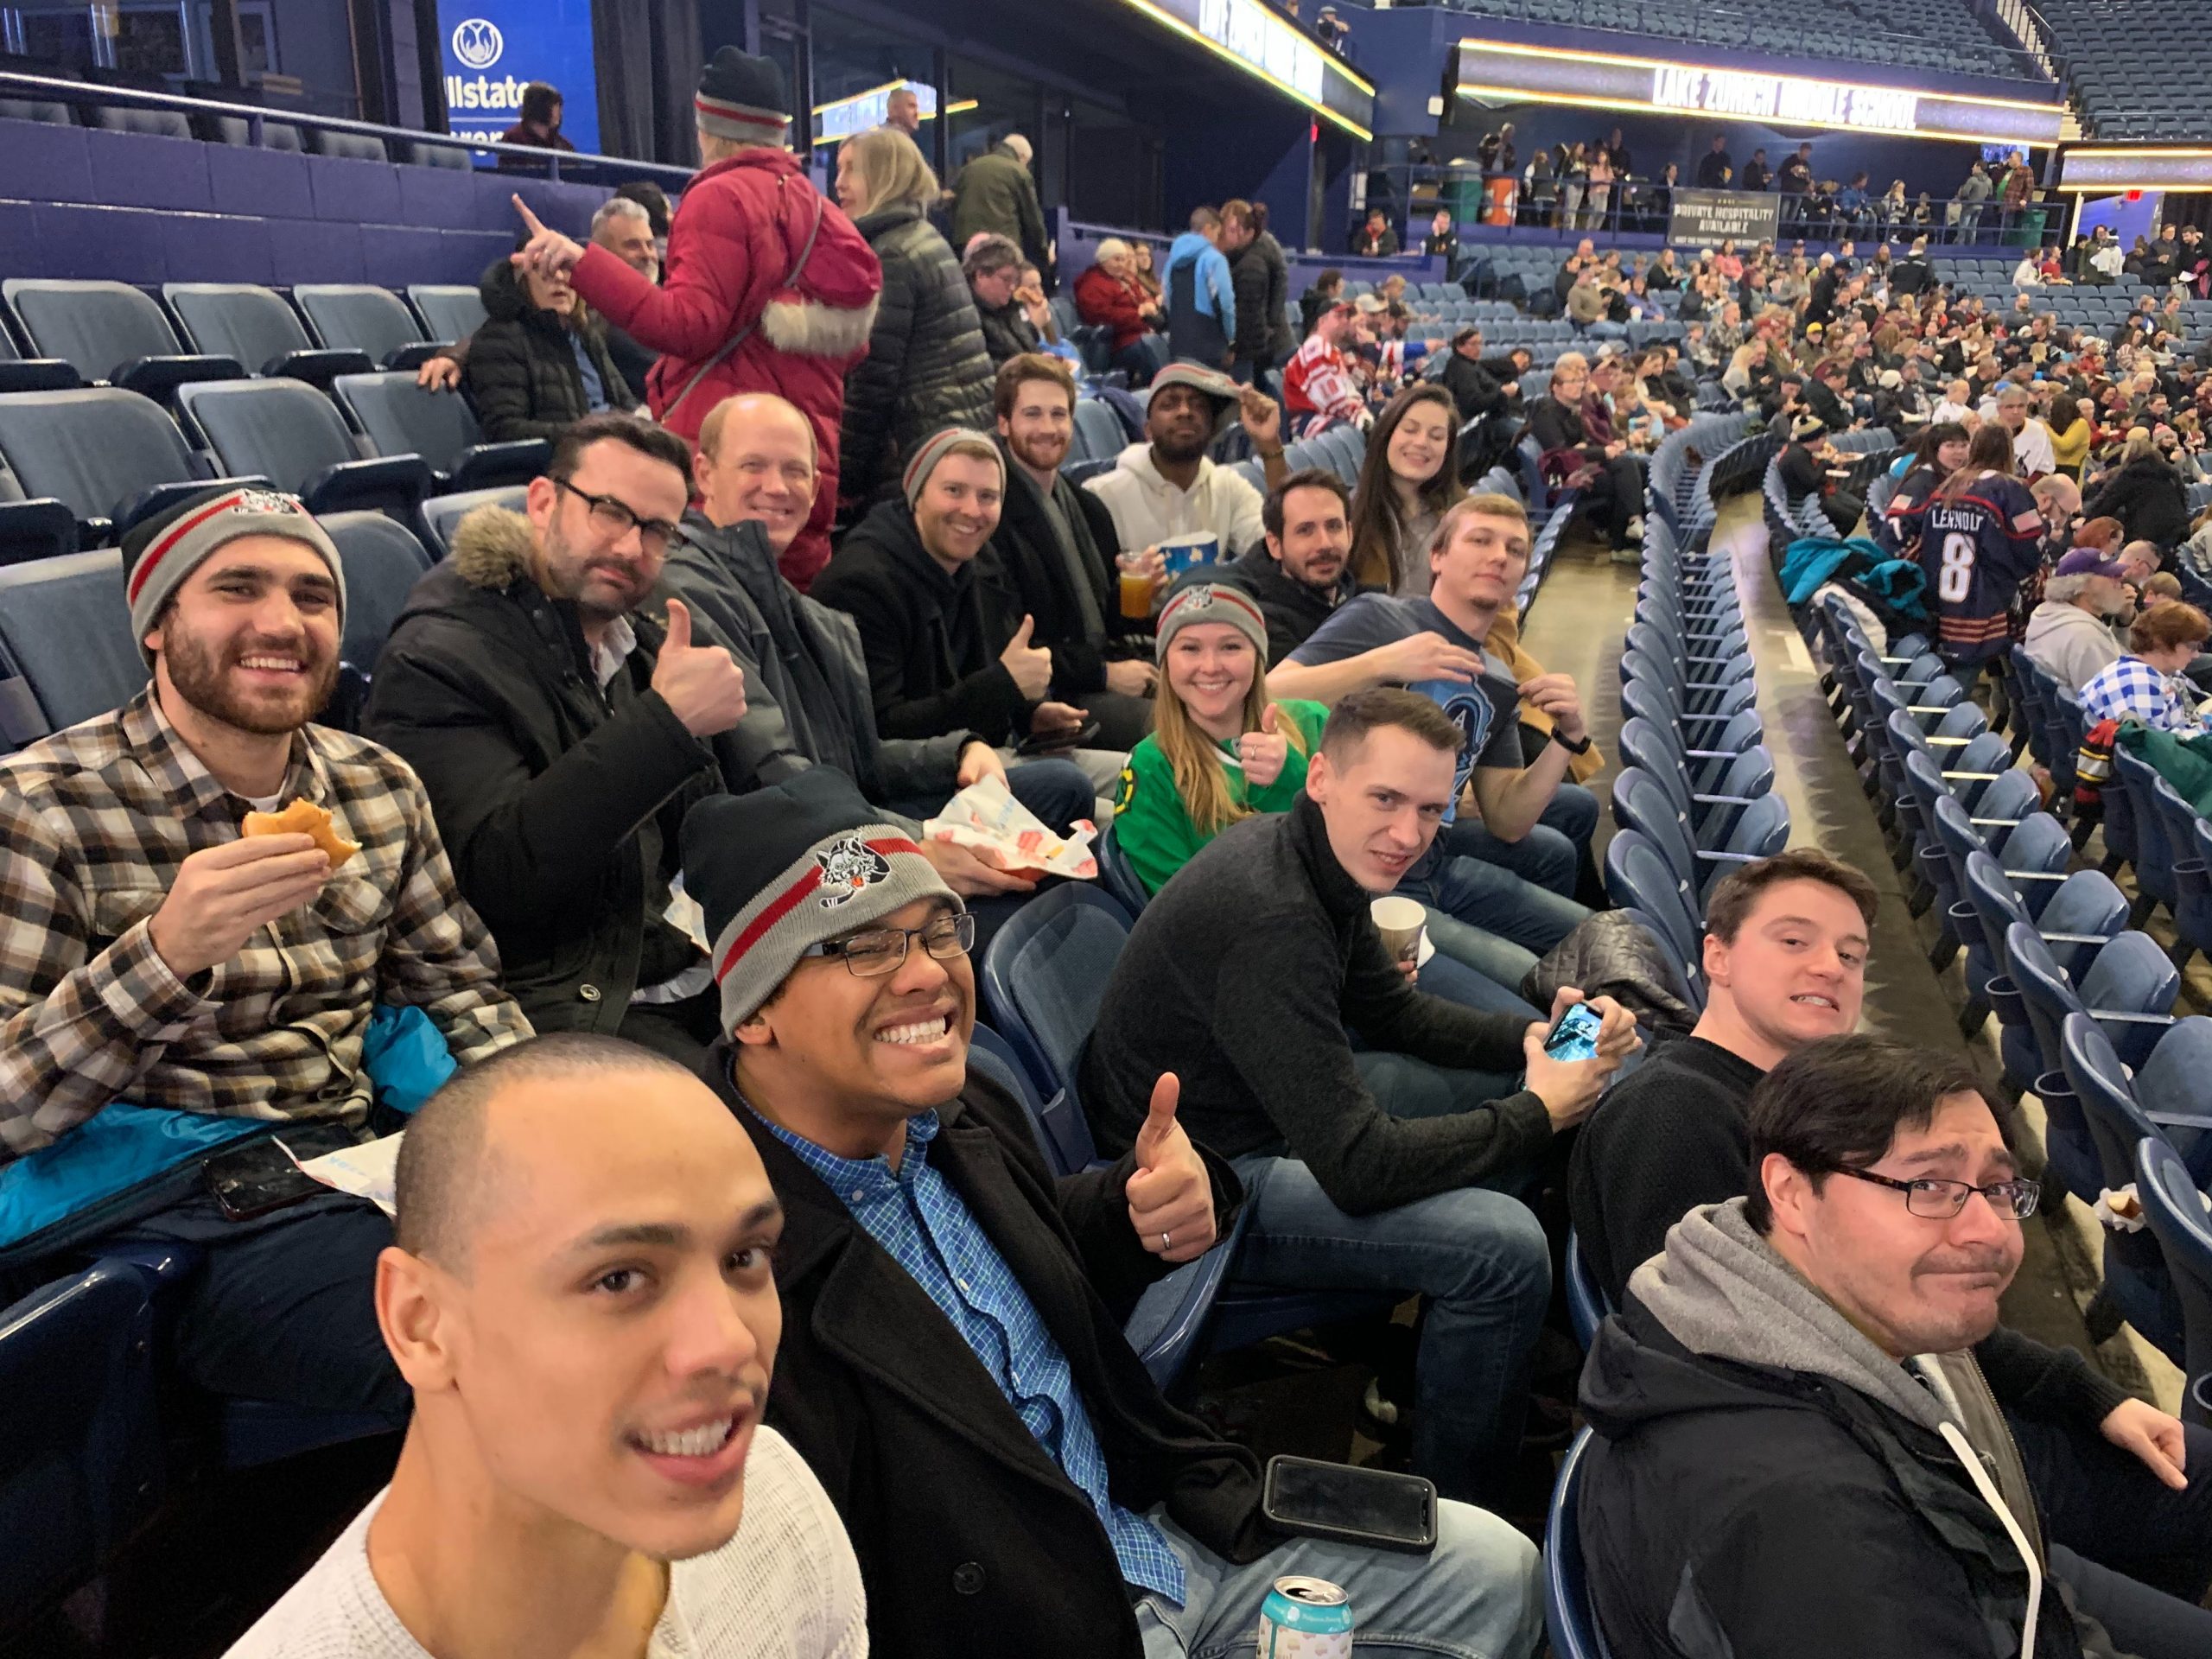 Chicago Wolves Game Brings Perficient Colleagues Closer Together